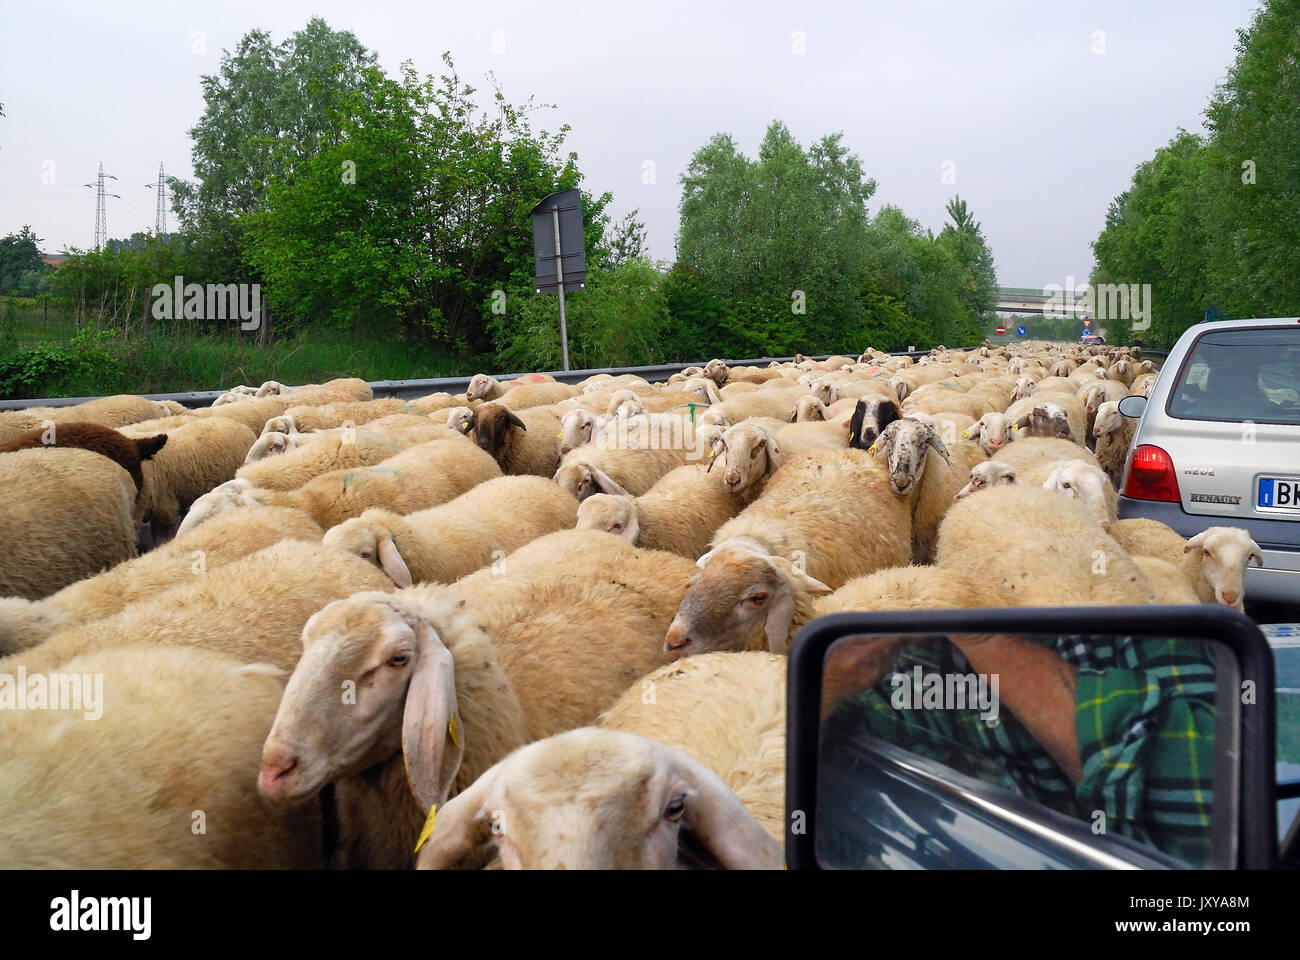 Cadoneghe, Italy. Transhumance of a sheep flock,  from plains to mountains. A transhumant flock of sheep, on its way to the mountain pasture-lands. Stock Photo